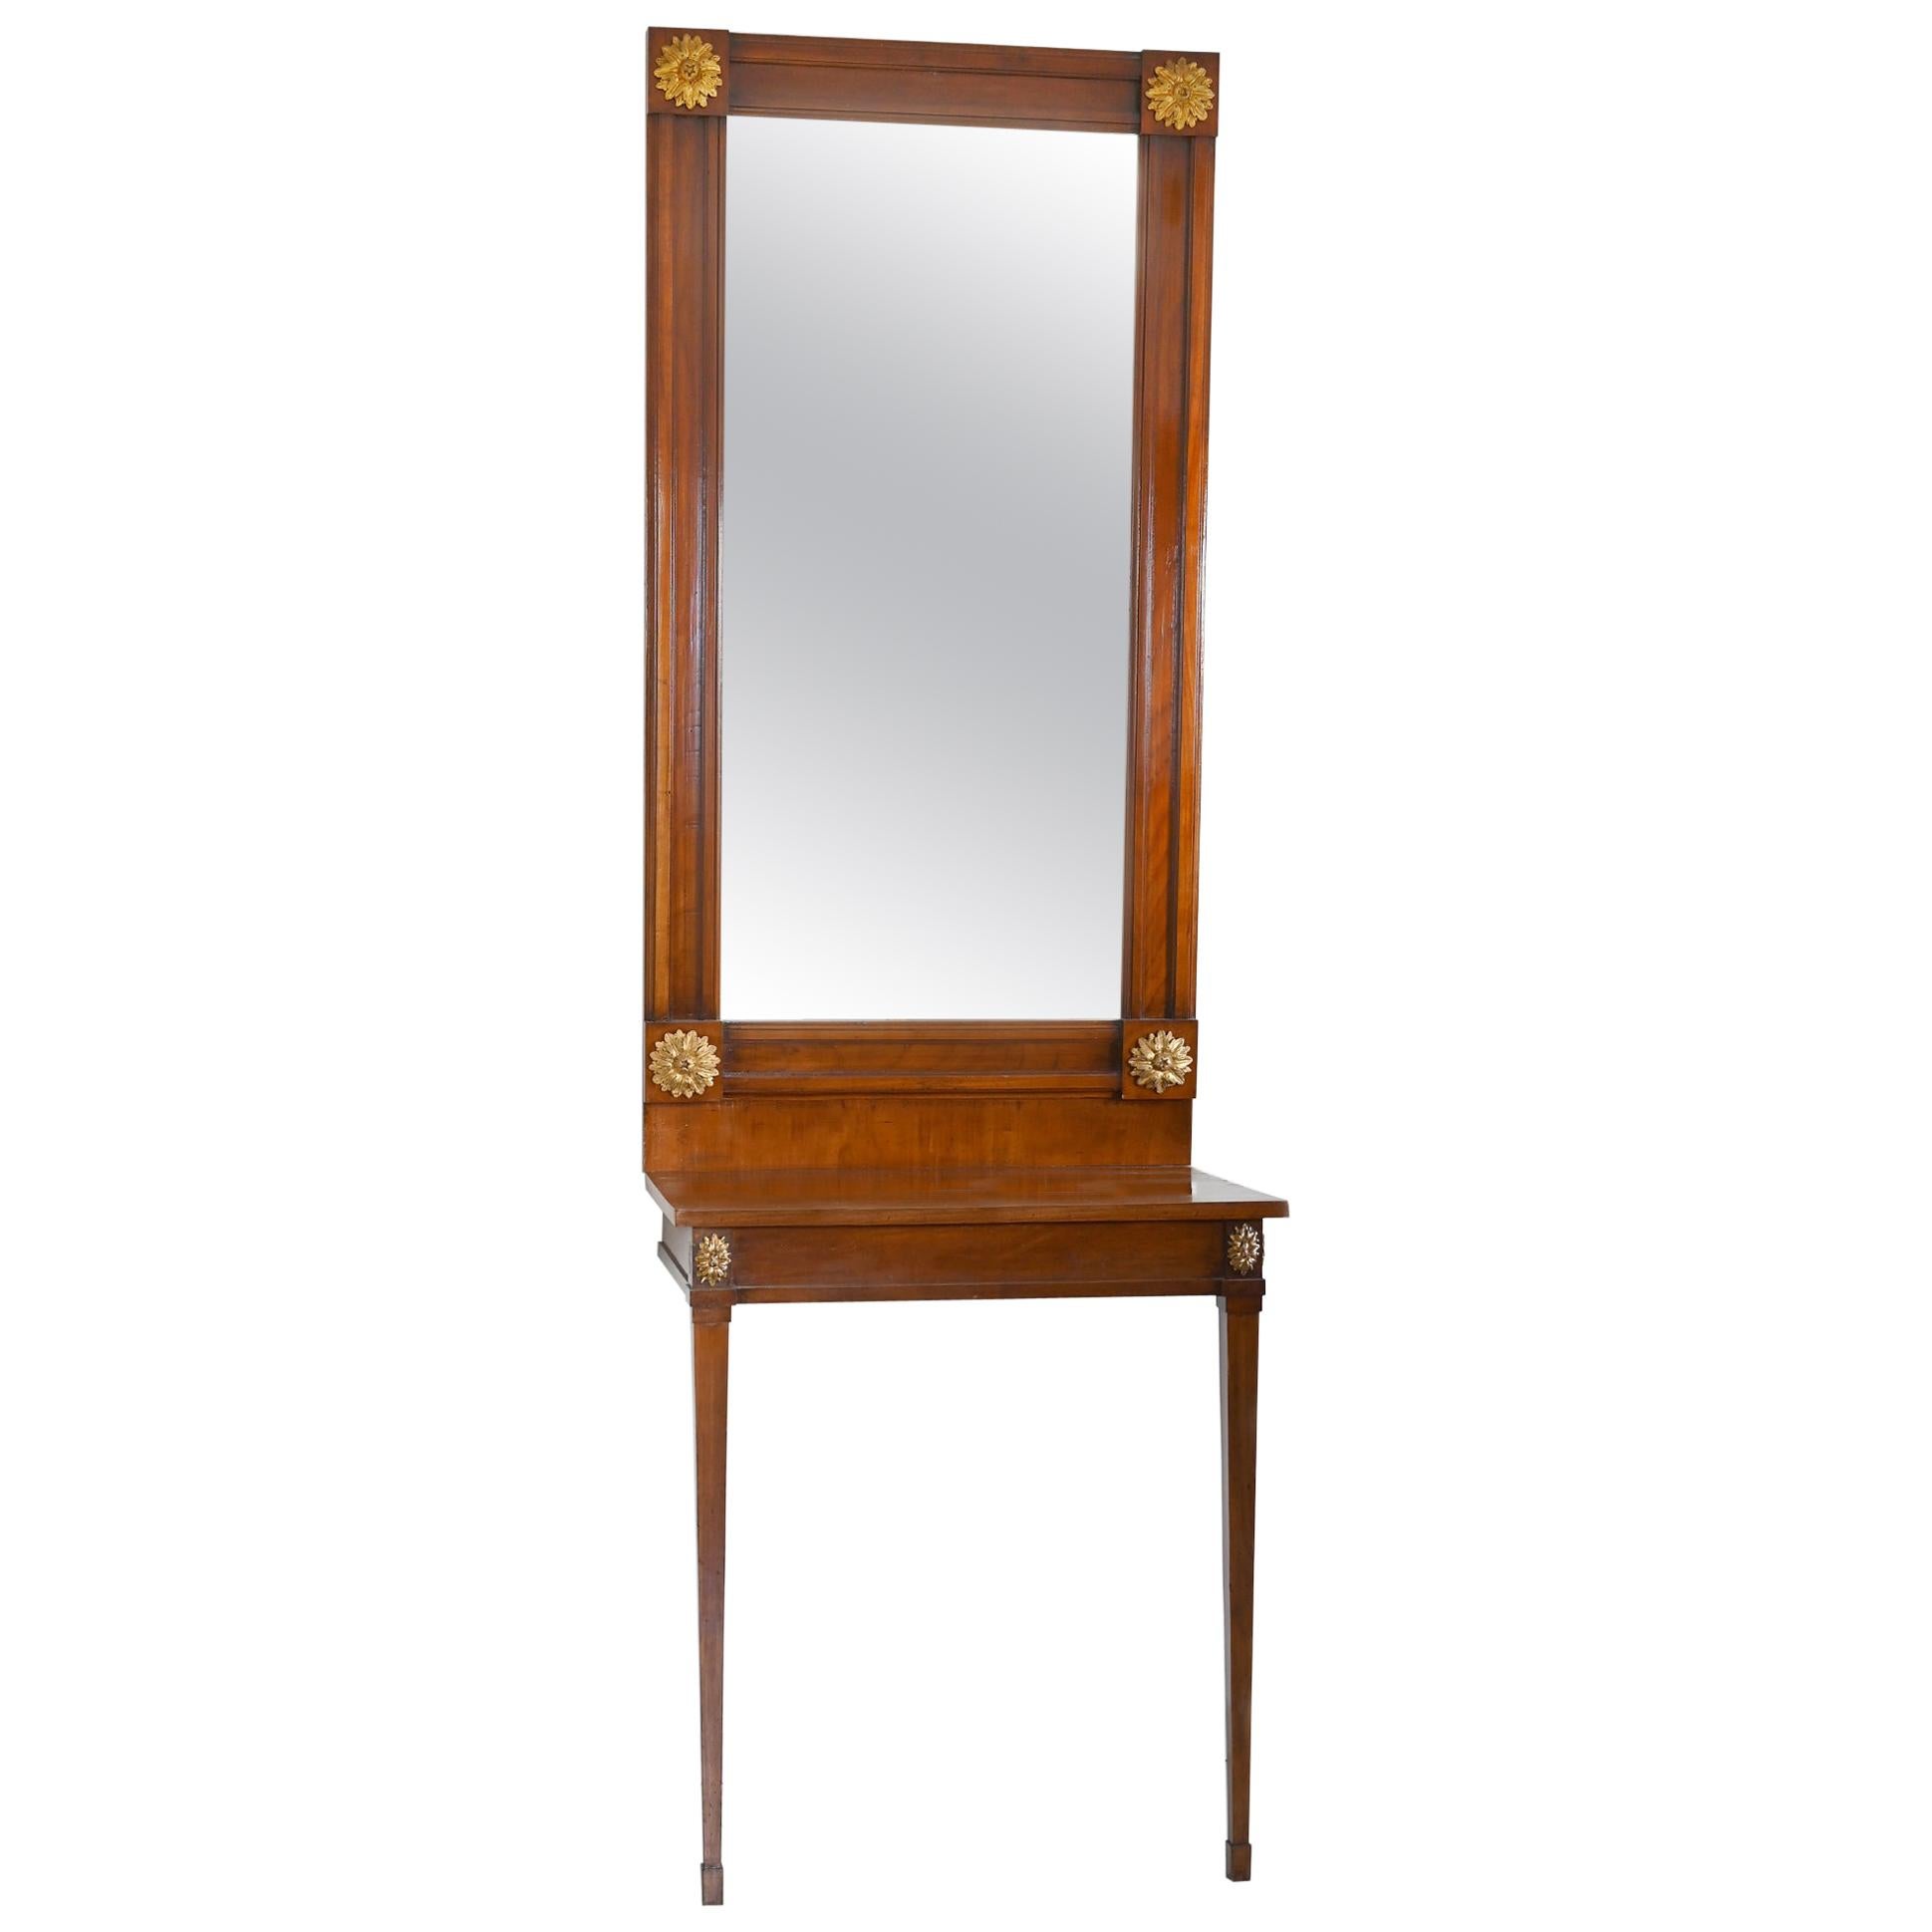 19th Century Console Table with Mirror circa 1810, South German cherrywood